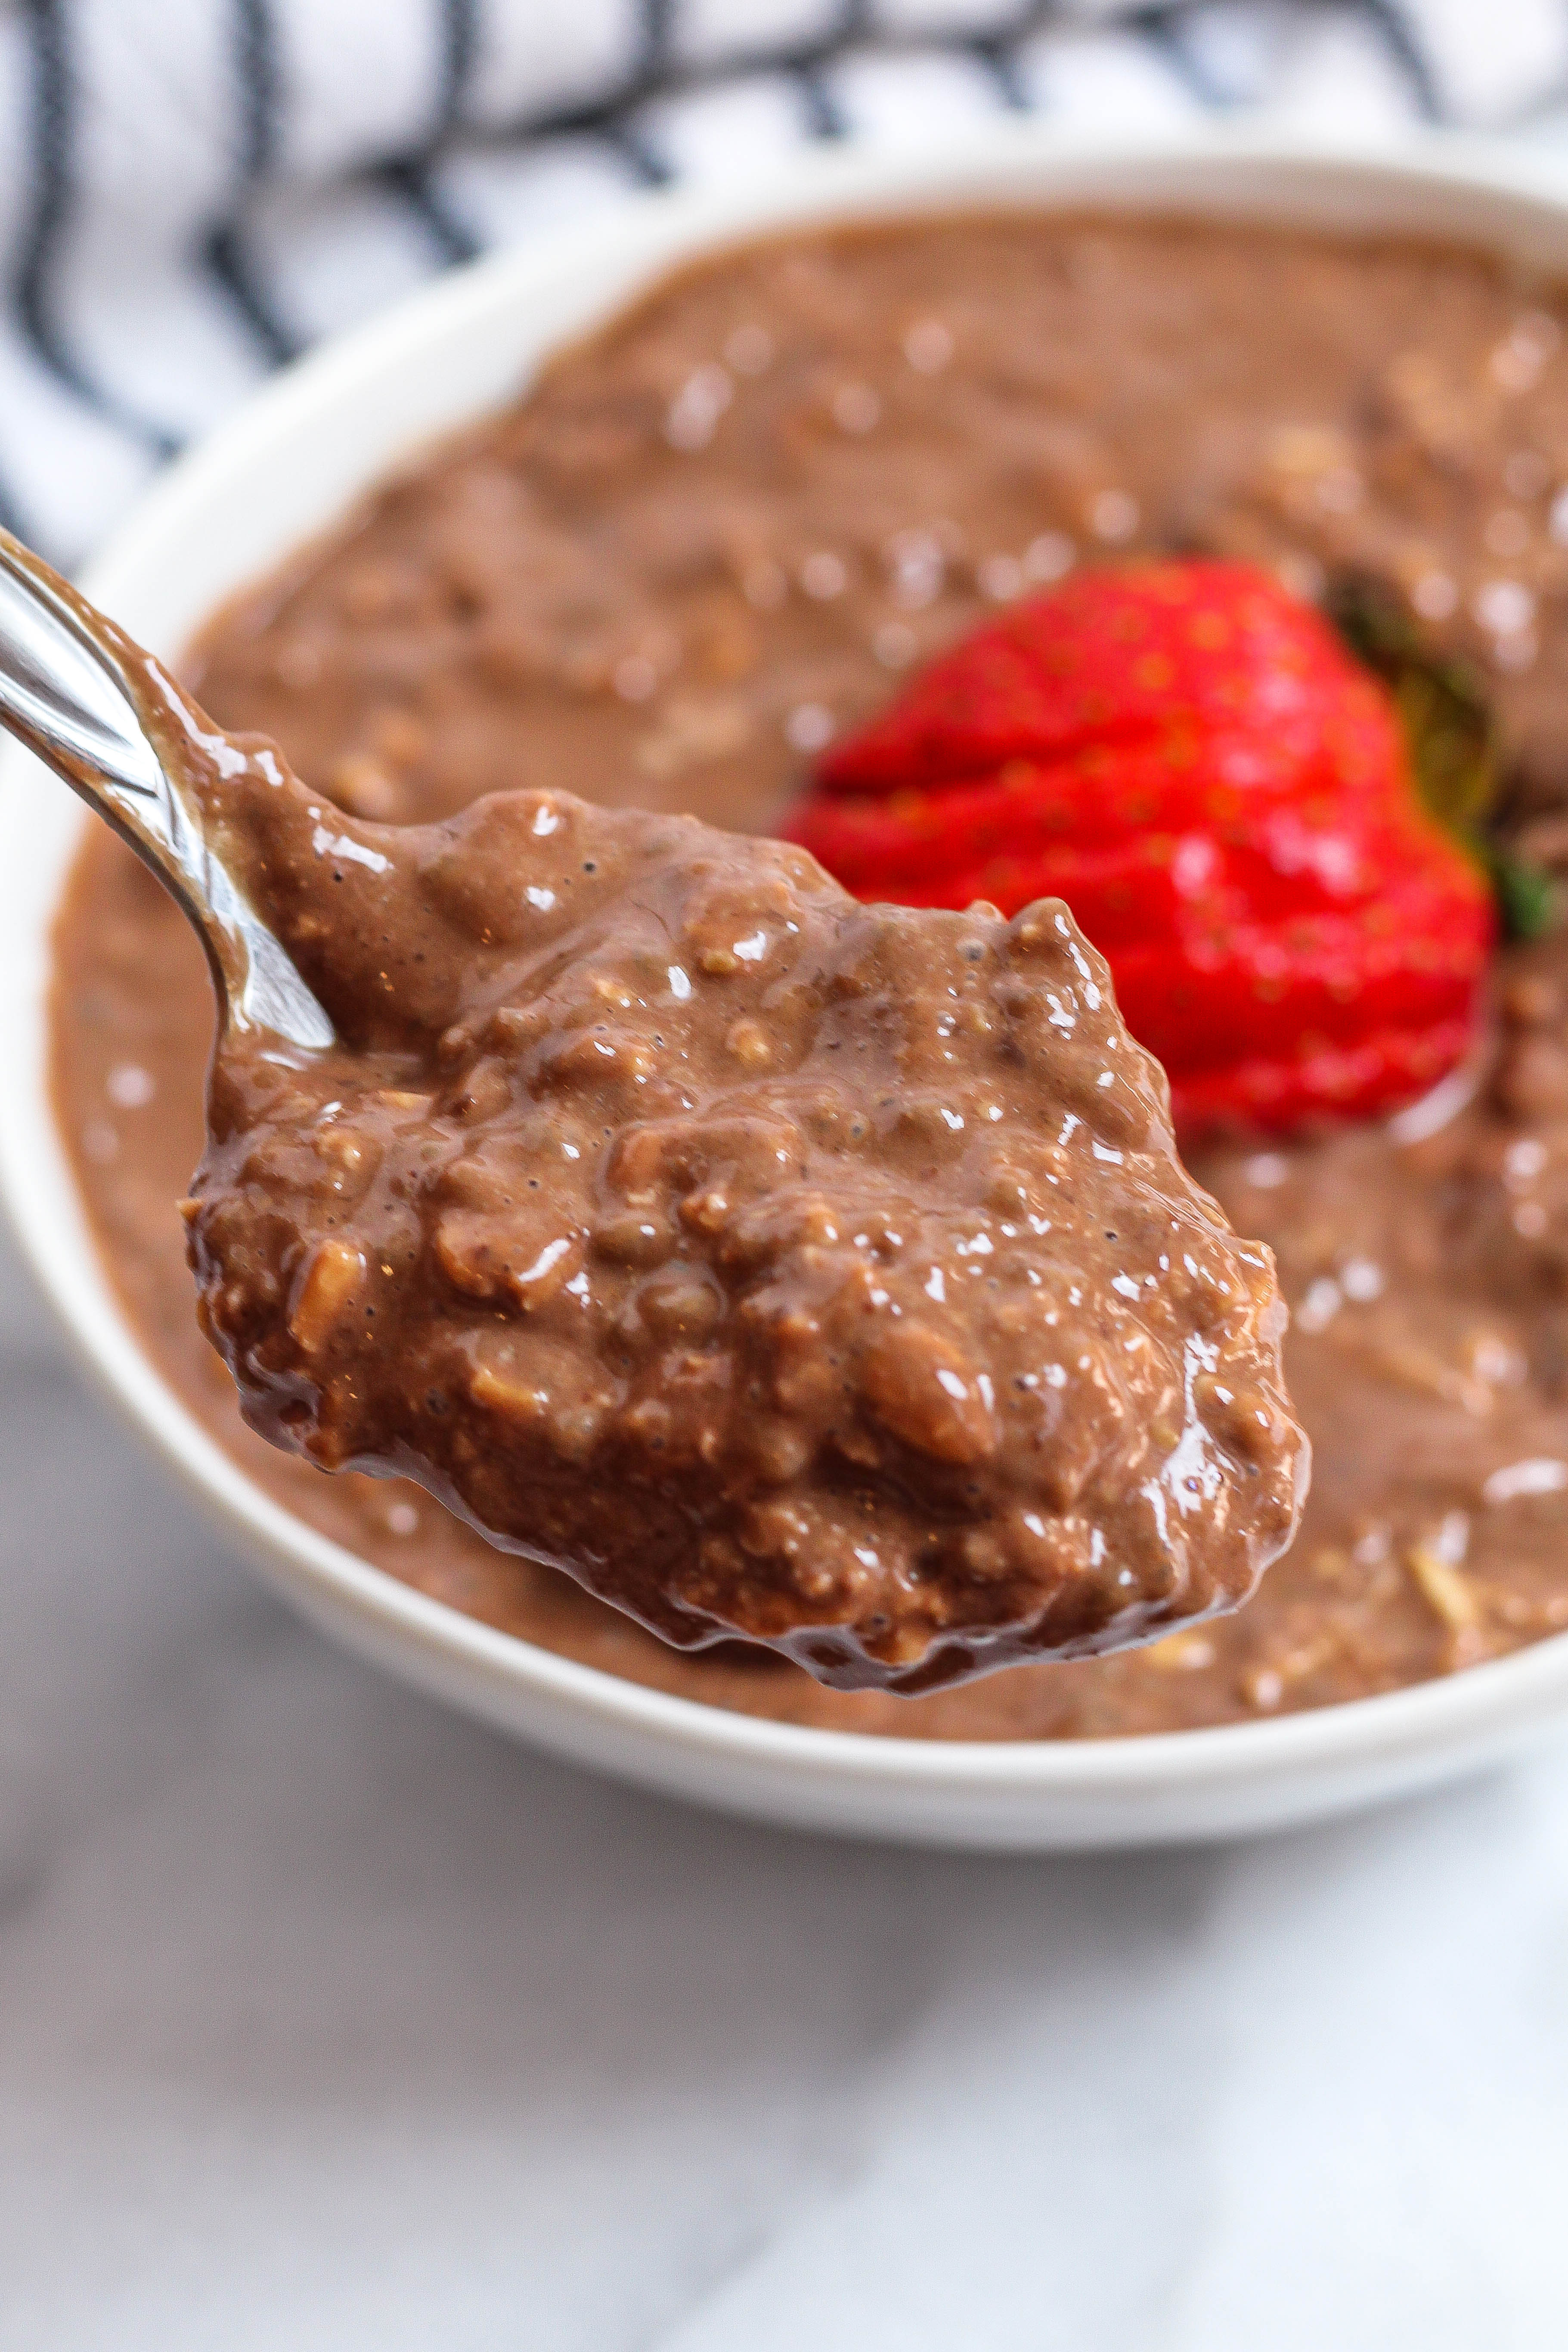 A Spoonful of Richly Chocolate Overnight Oats with Protein Powder